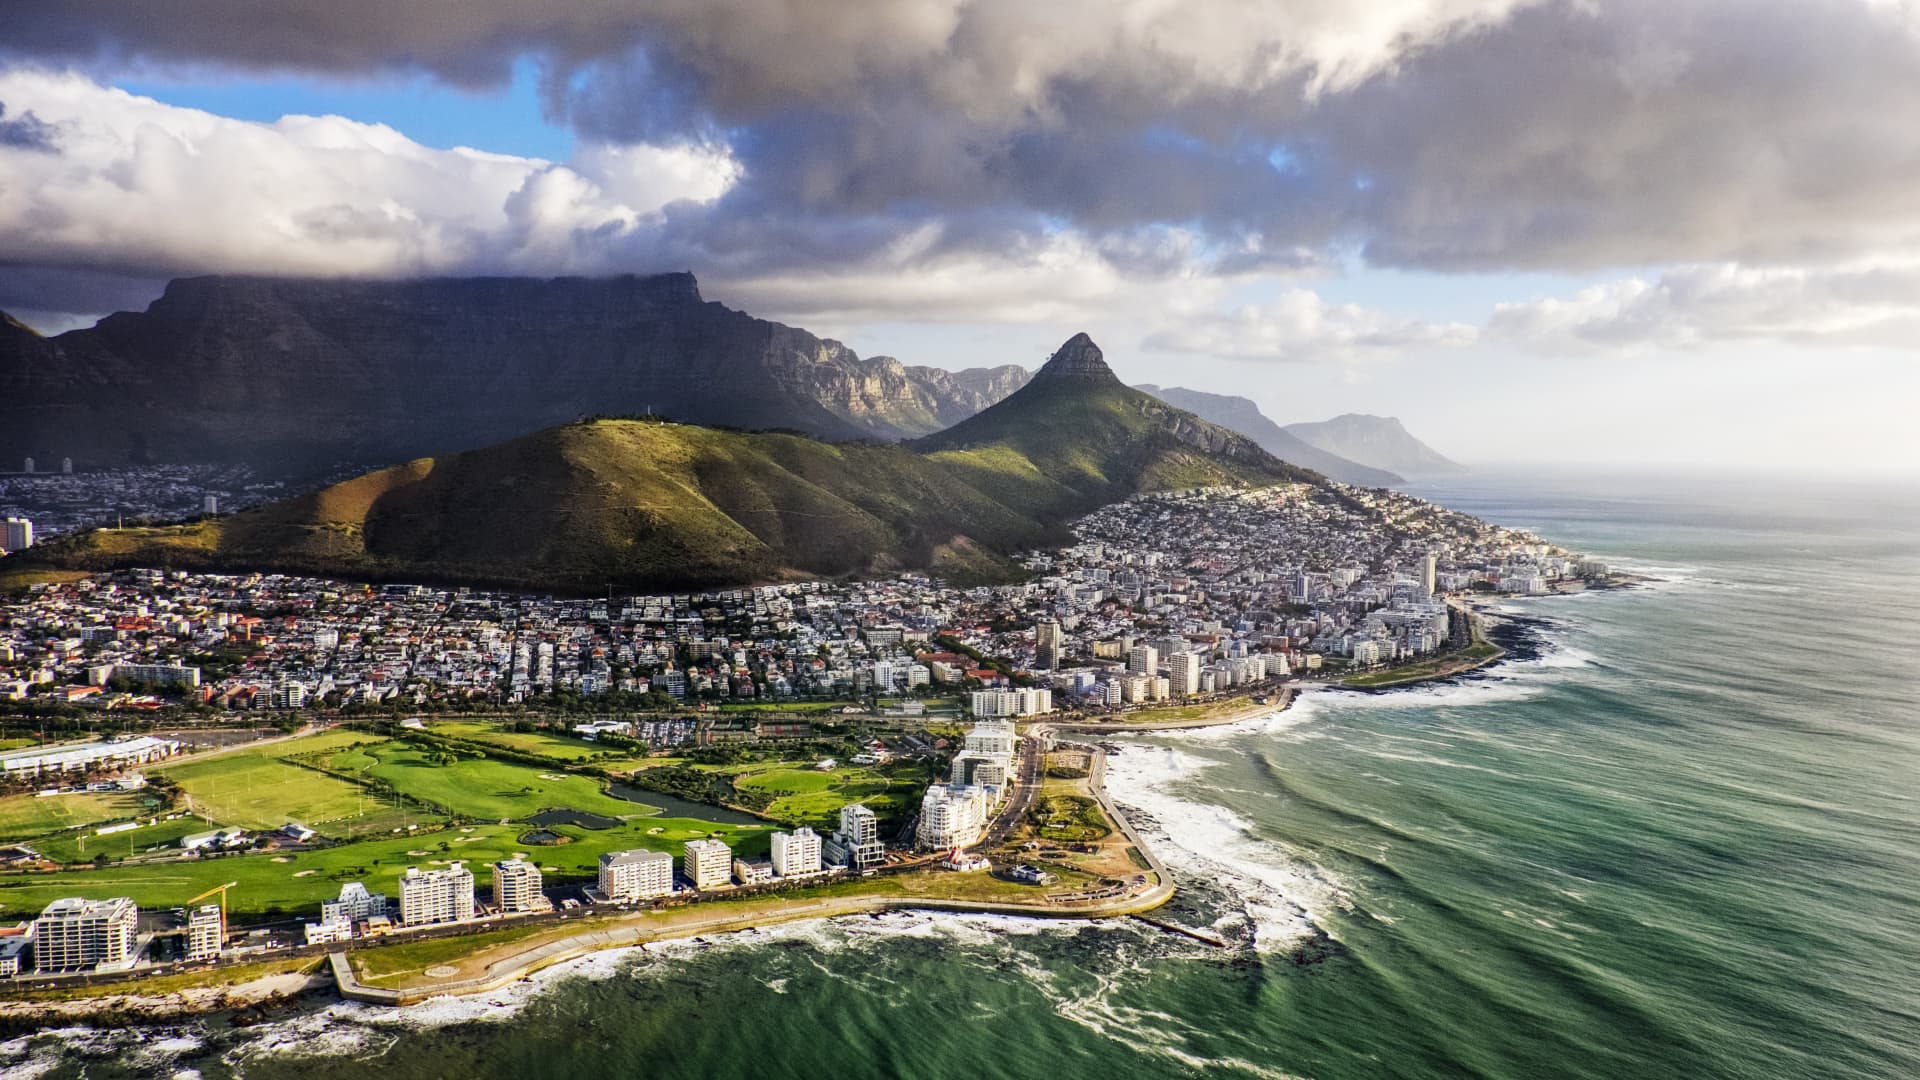 Cape Town is beautiful from any angle, but especially from the peaks of the surrounding mountains.